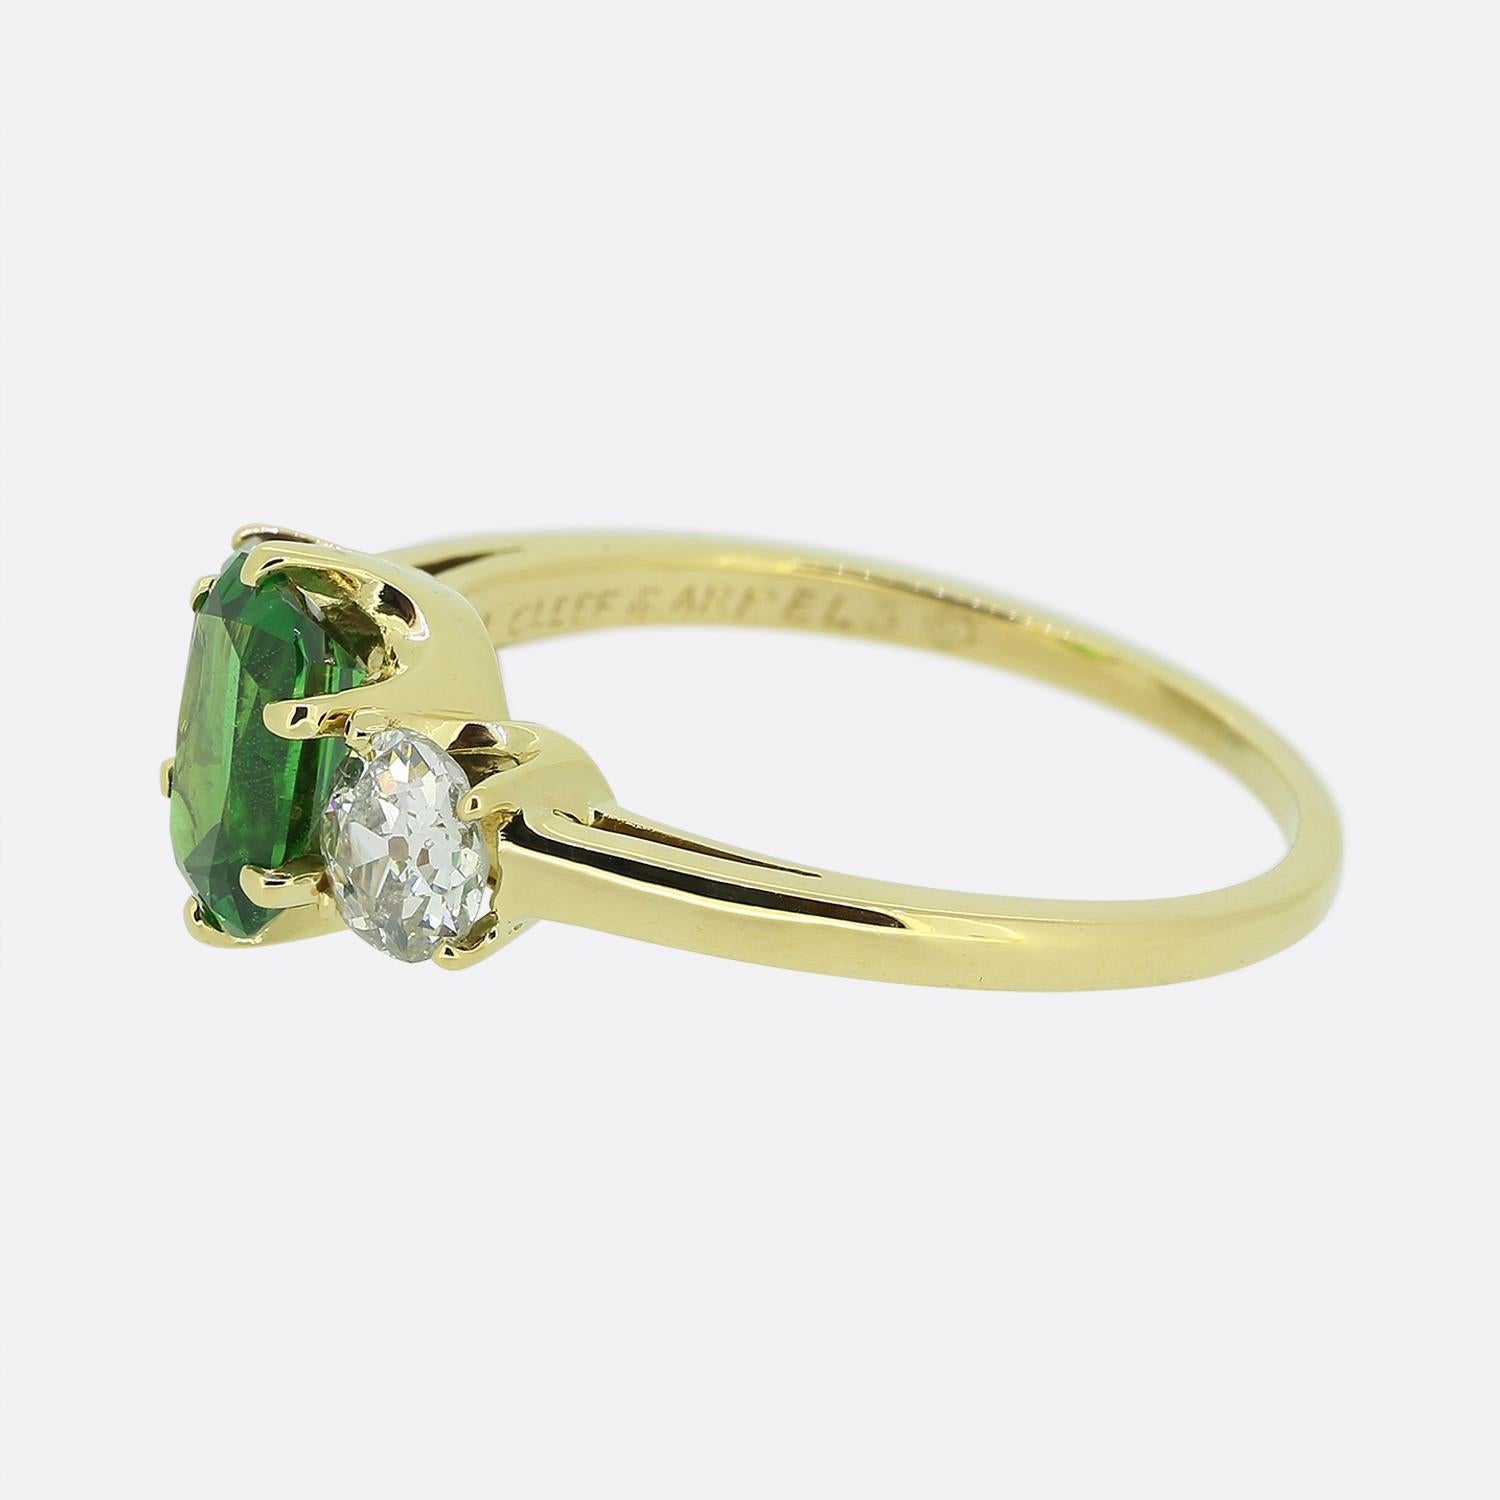 Here we have an outstanding creation from the world renowned luxury jewellery designer Van Cleef & Arpels. This ring has been crafted from 18ct yellow gold and showcases a trio of gemstones across the face. A single oval faceted tsavorite garnet